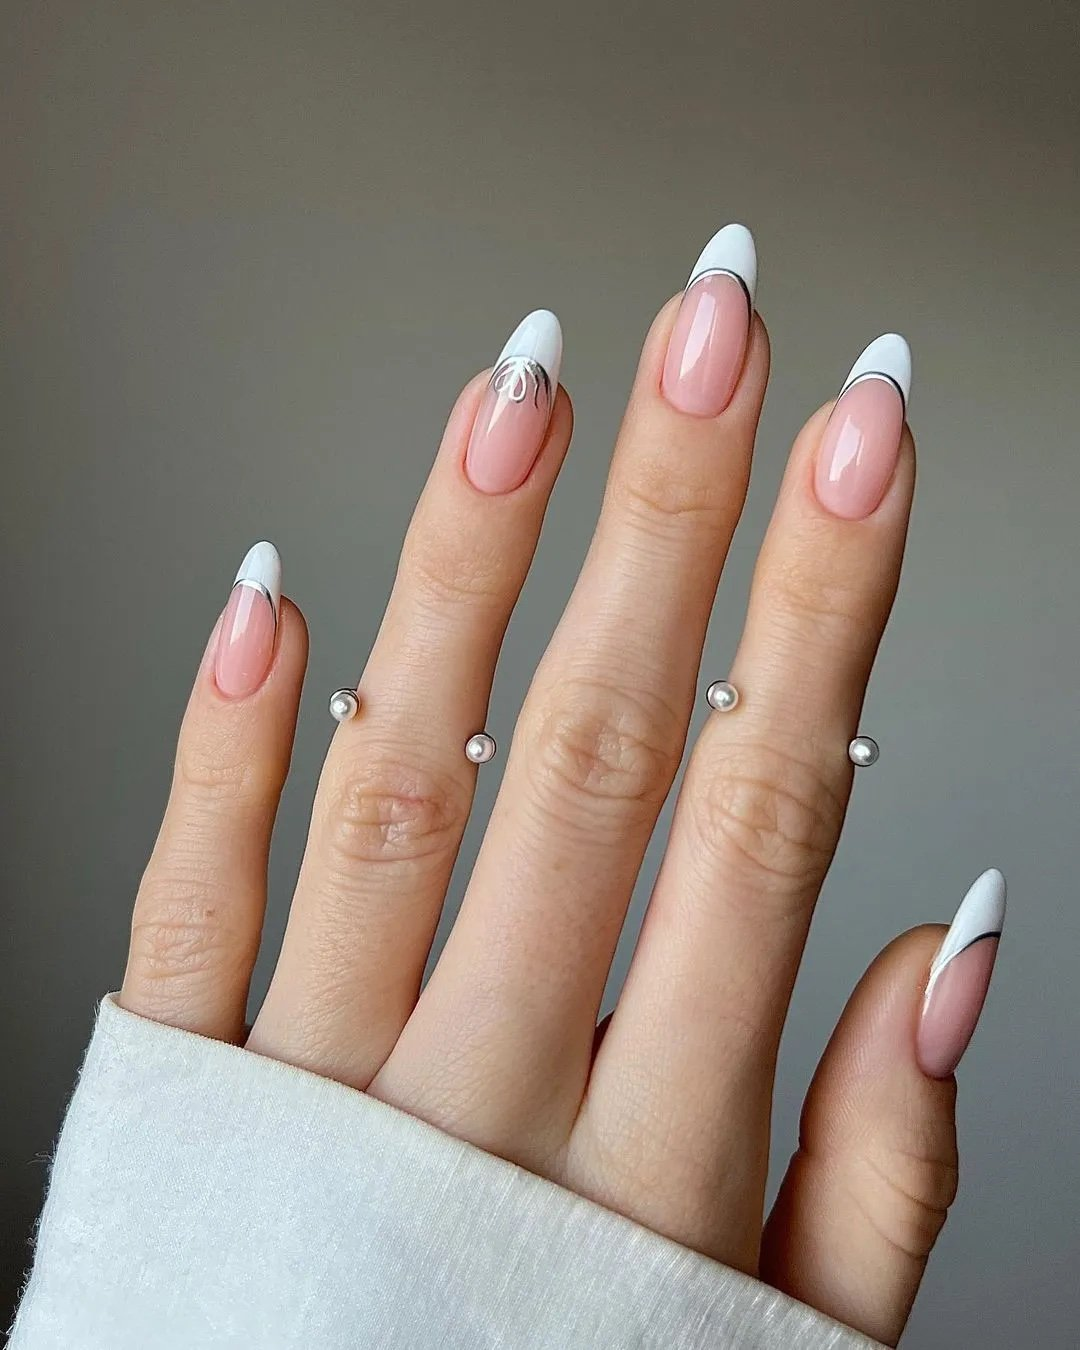 115+ Best Elegant and Simple Nail Designs With Diamonds